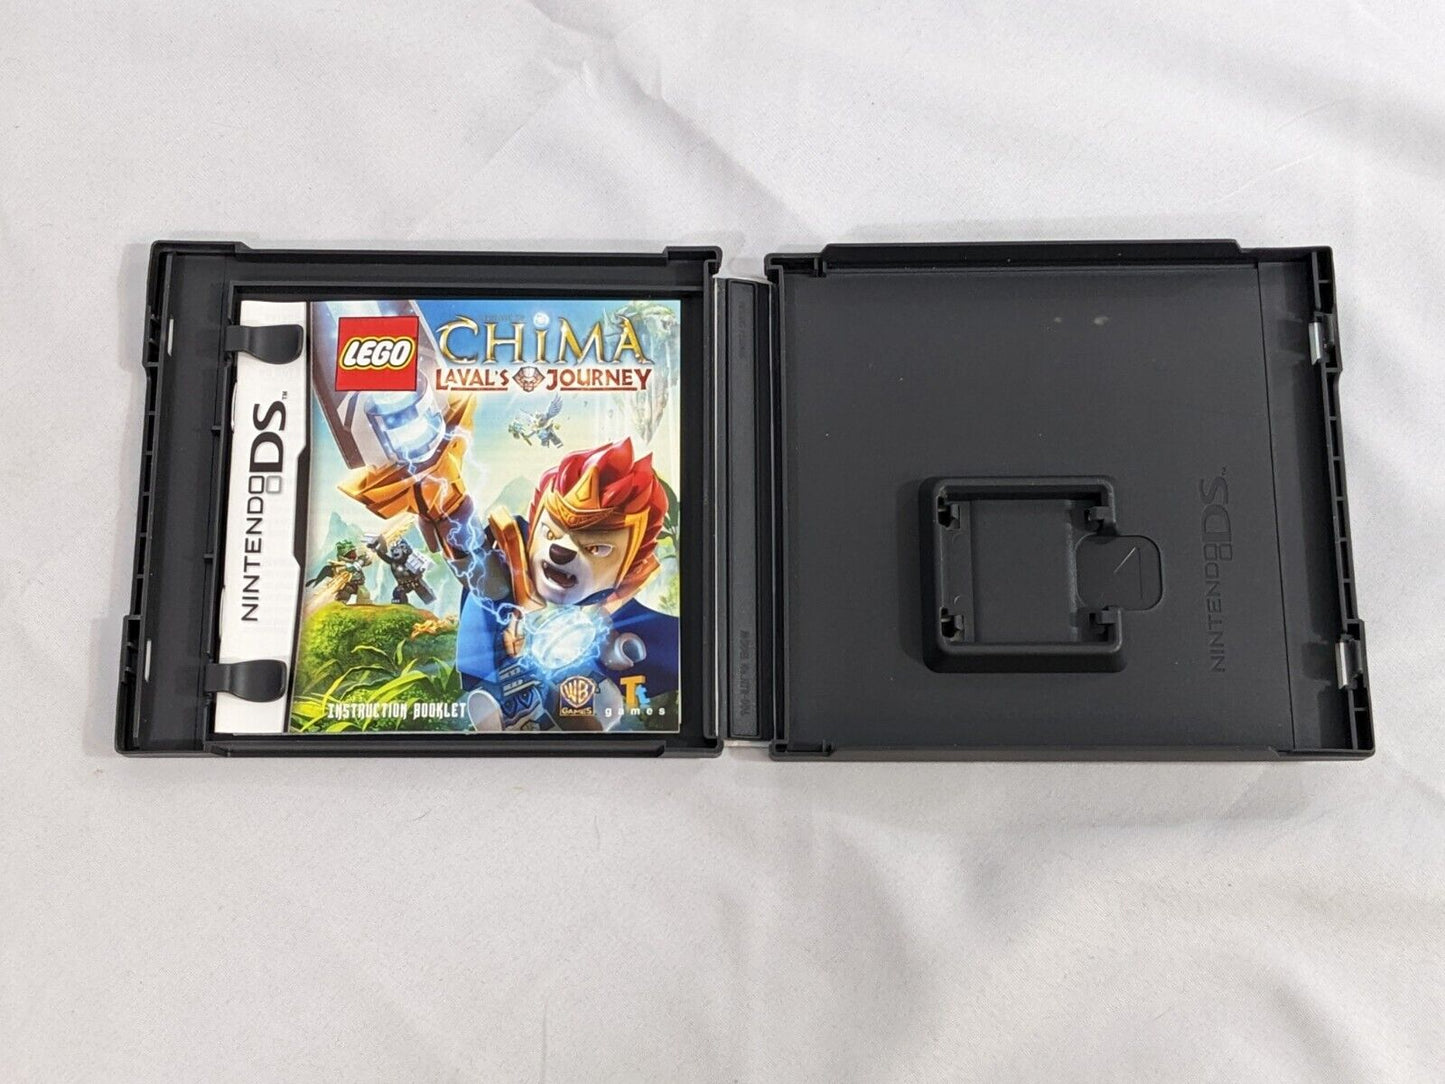 Nintendo DS Lego Chima Laval's Journey Manual and Cartridge Game Case Only